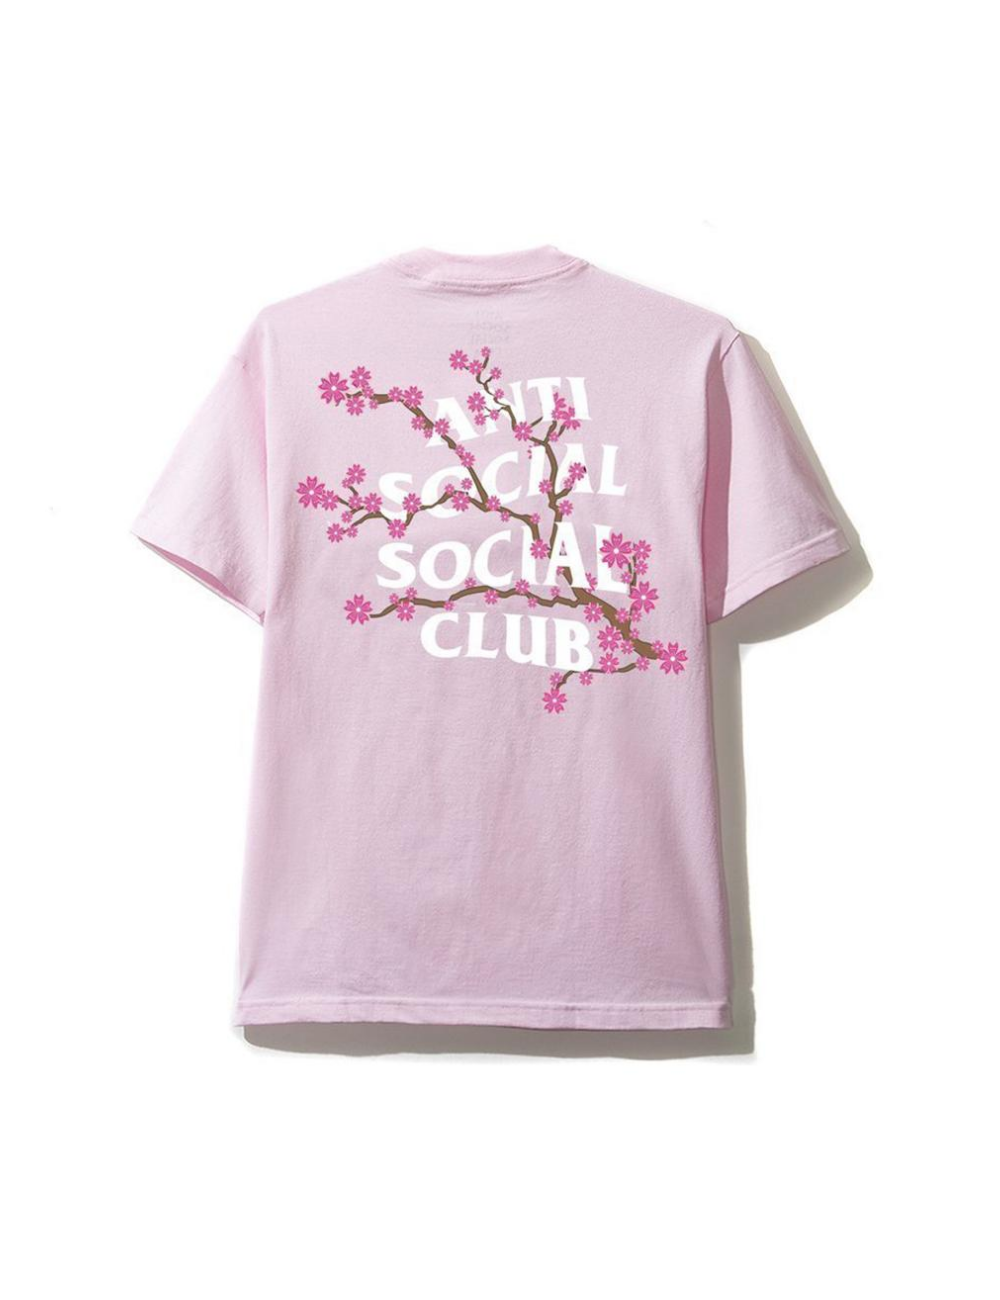 Anti Social Social Club Cherry Blossom Pink T-Shirt - Shop Streetwear, Sneakers, Slippers and Gifts online | Malaysia - The Factory KL